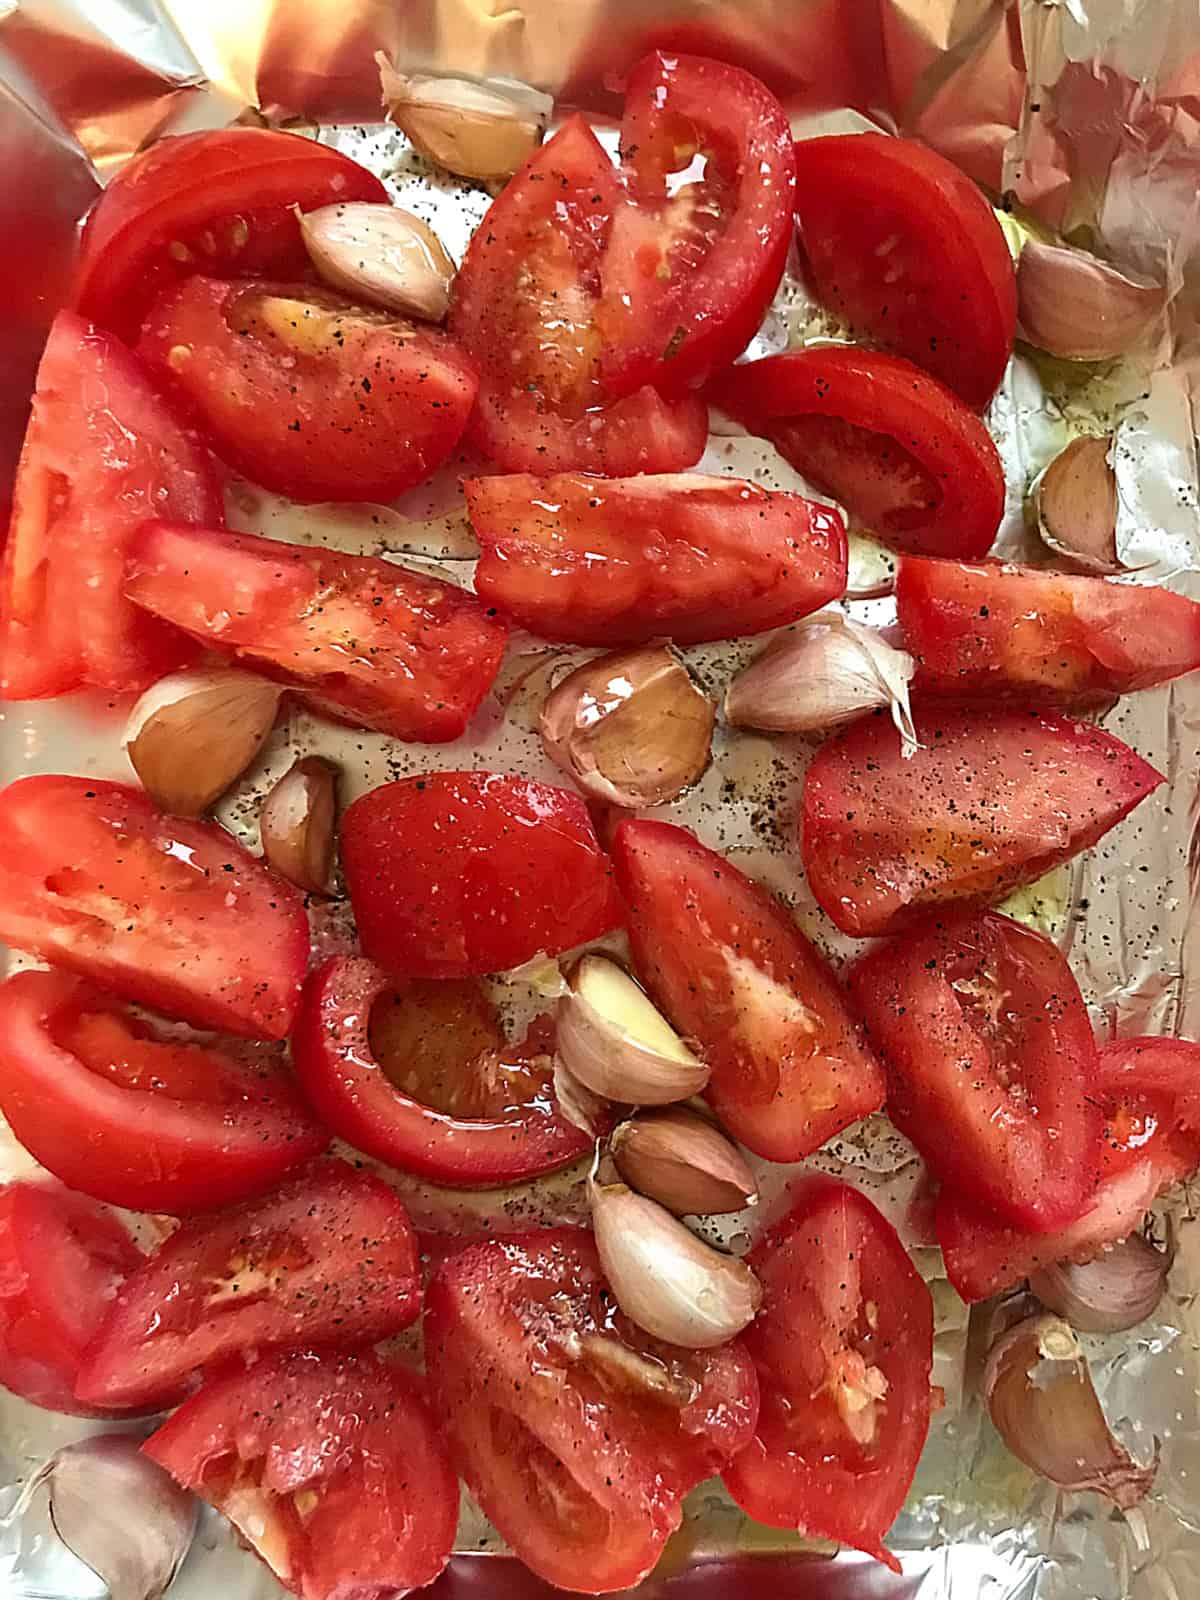 Raw wedges of tomato and garlic cloves on foil paper